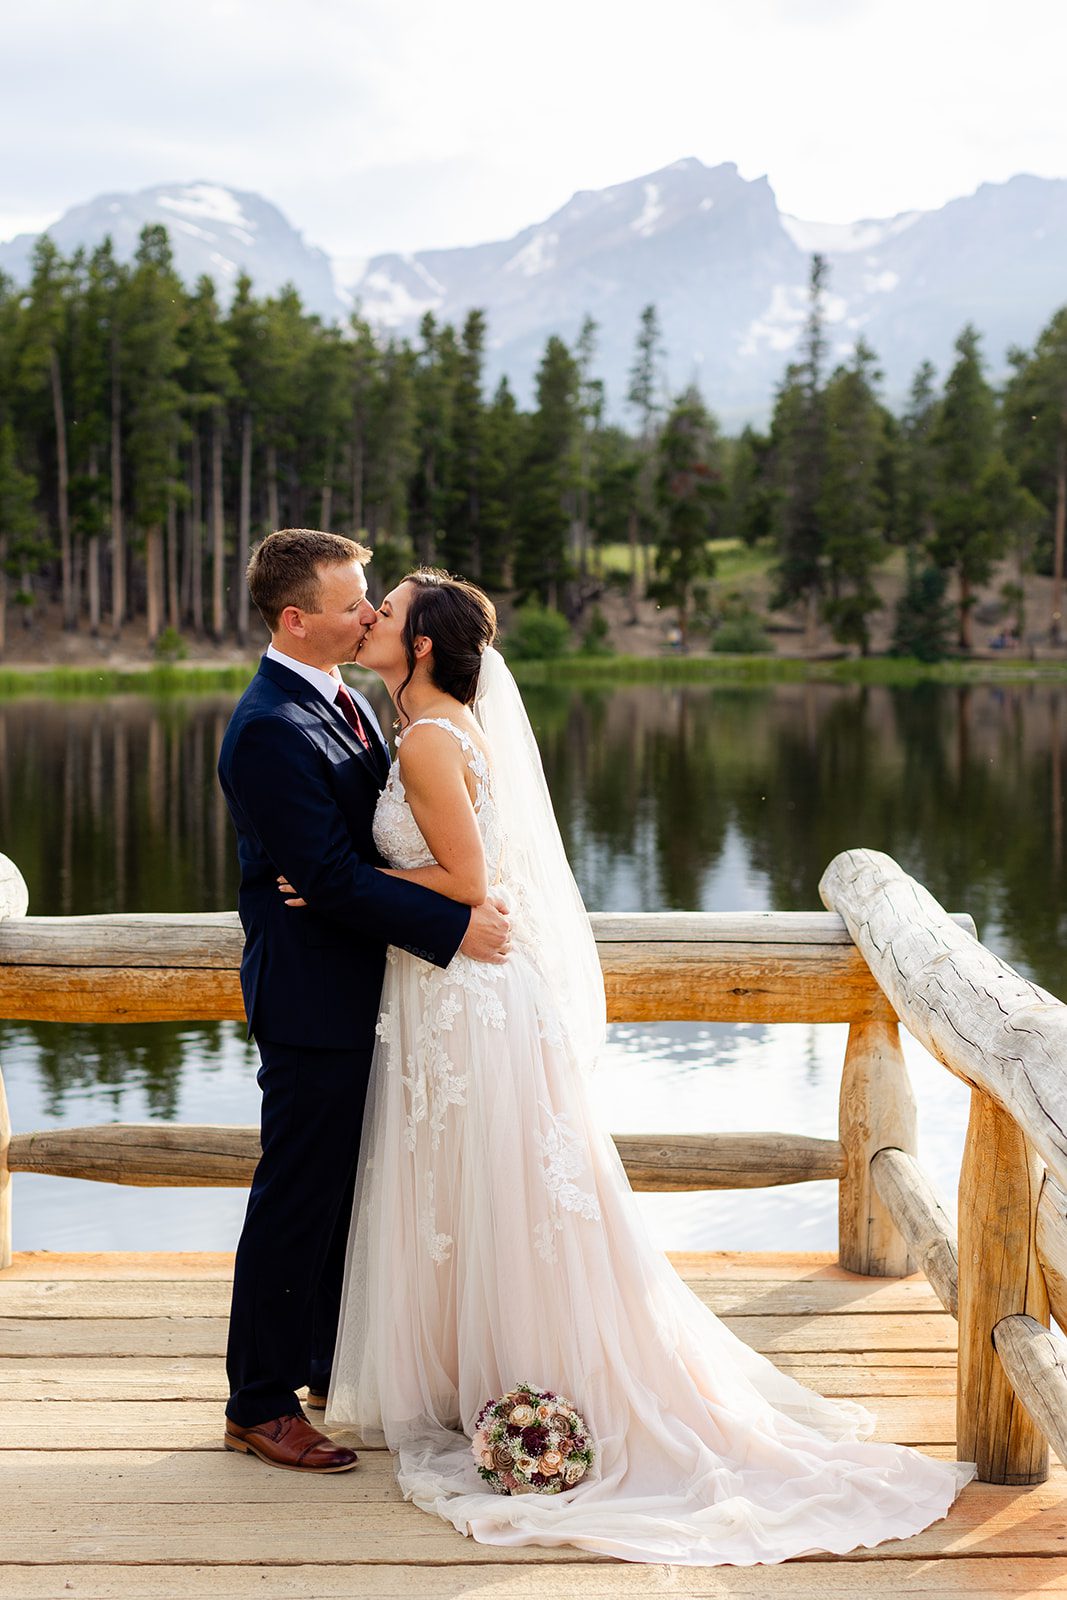 Bride and groom kiss for the first time at their sprague lake summer elopement.